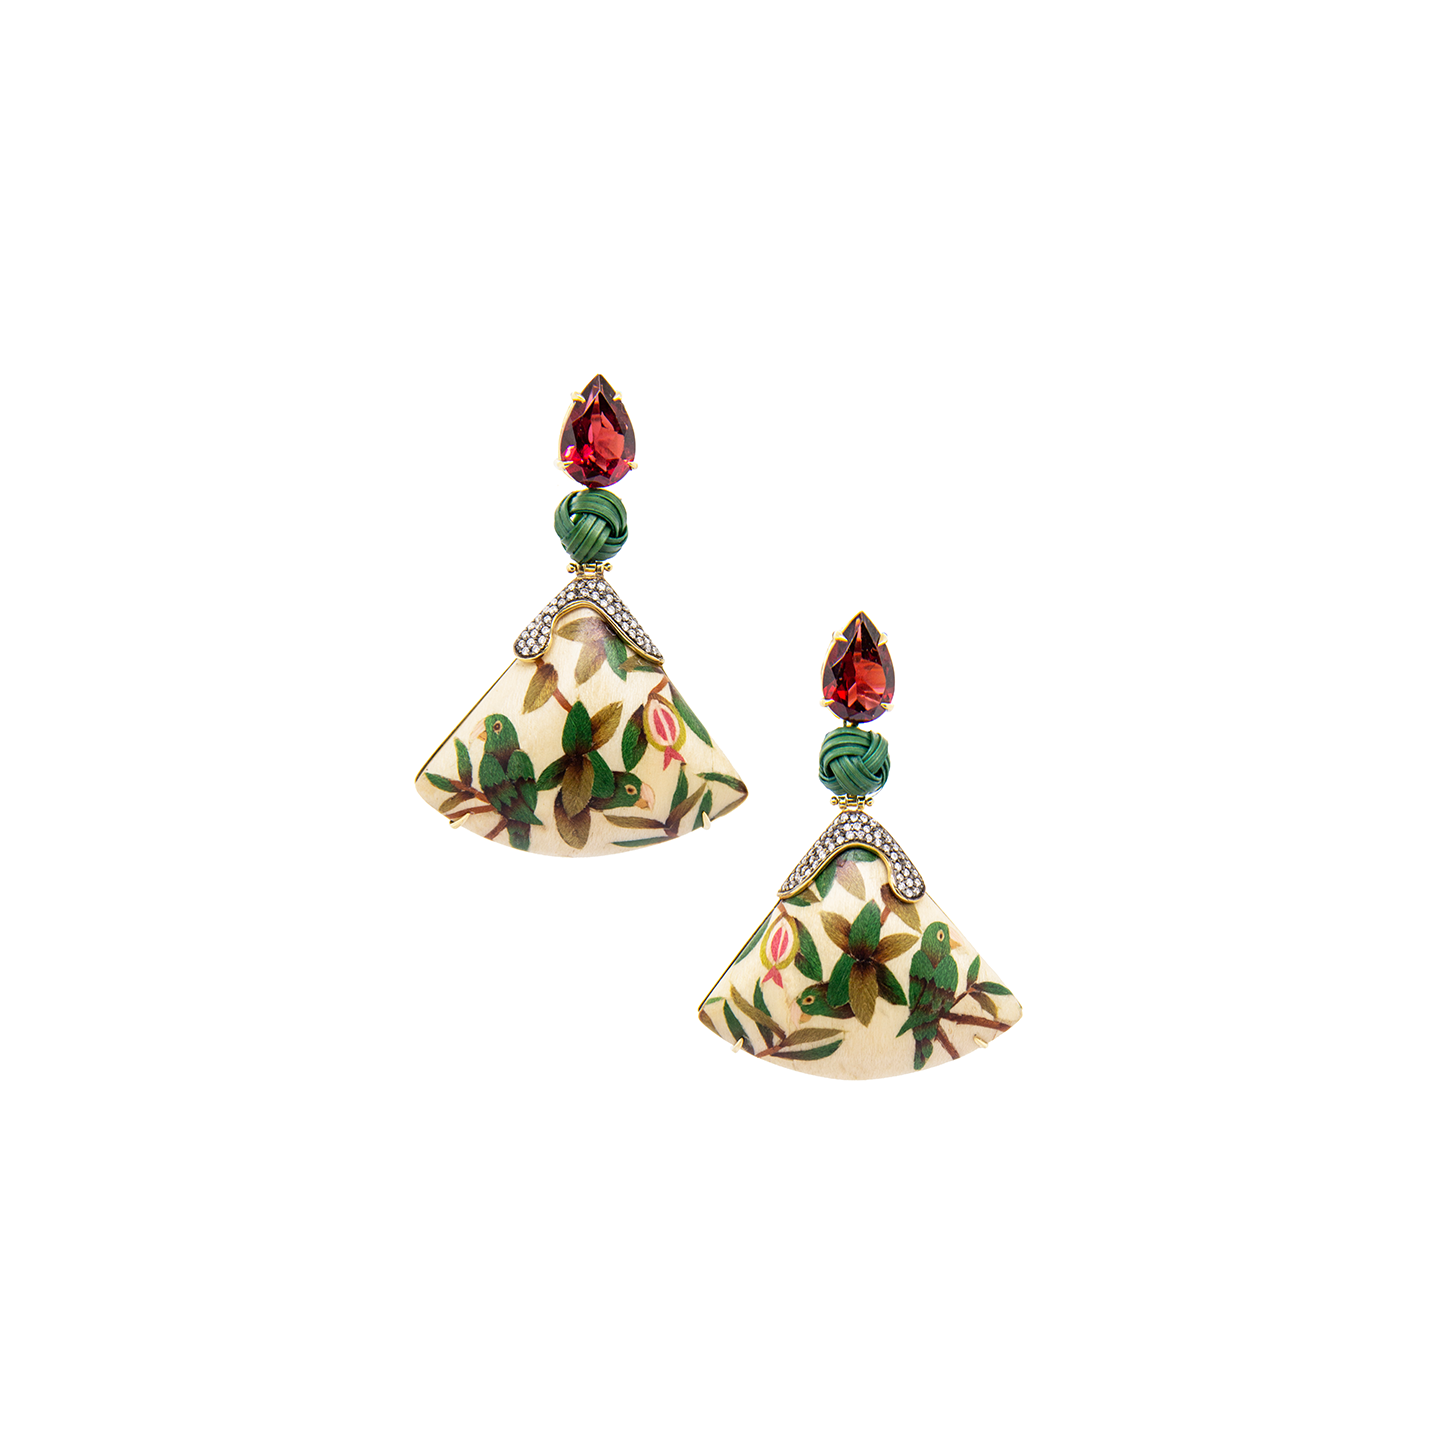 Silvia Furmanovich x Moye Marquetry Earrings with Bamboo, Guava and Parrot Pattern